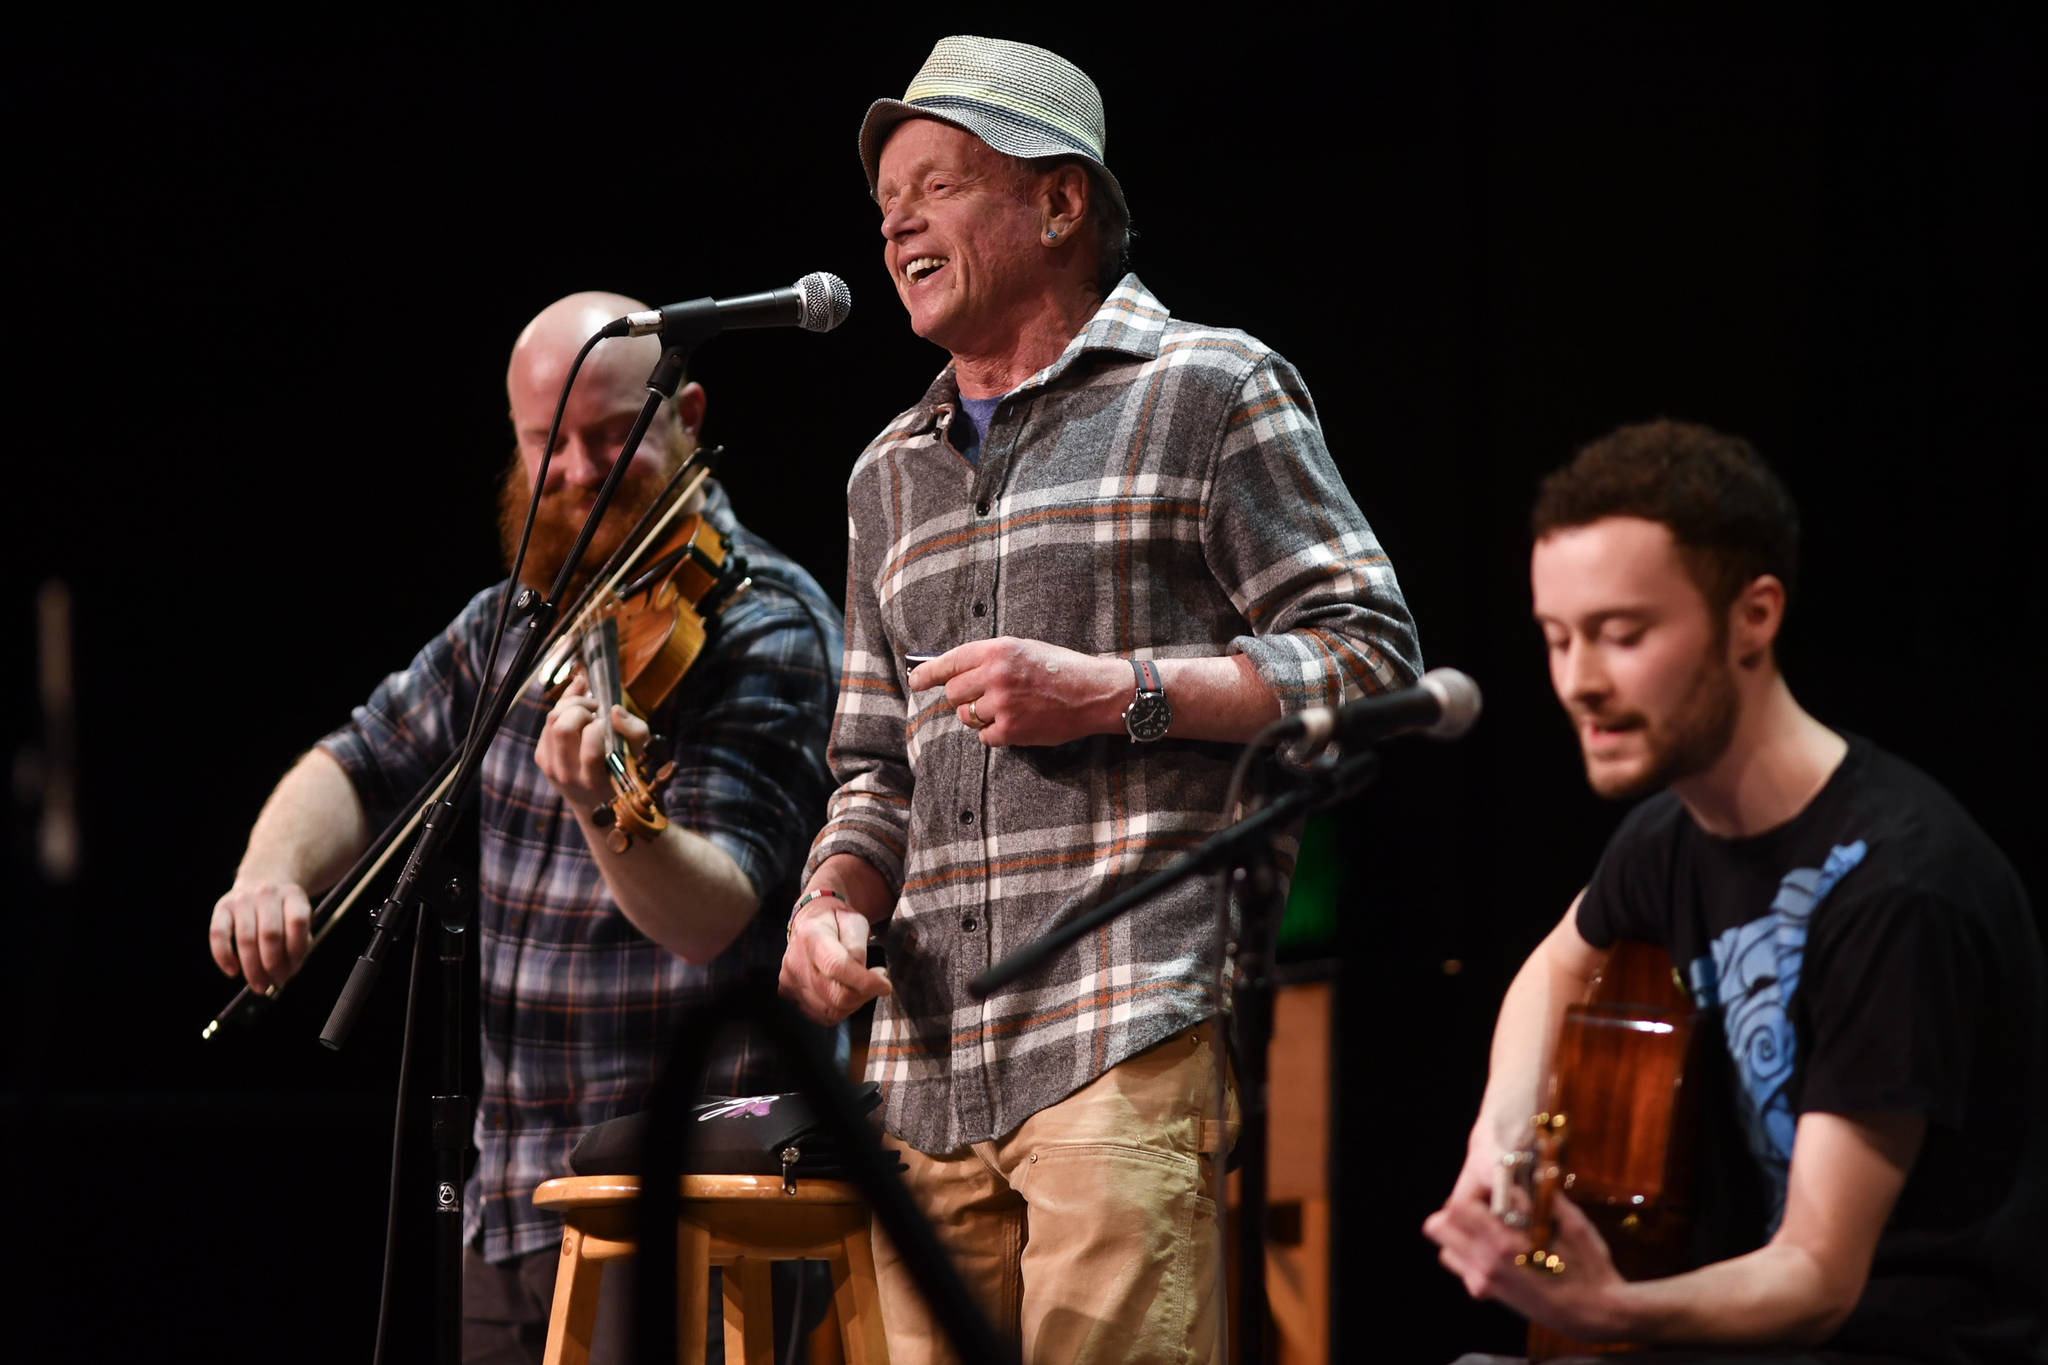 Tim Triggs, Zane Jones and Nate Wiley of the Wiley’s Coyotes, of Boulder, Colorado, perform at the 45th annual Alaska Folk Festival at Centennial Hall on Monday, April 8, 2019. (Michael Penn | Juneau Empire)